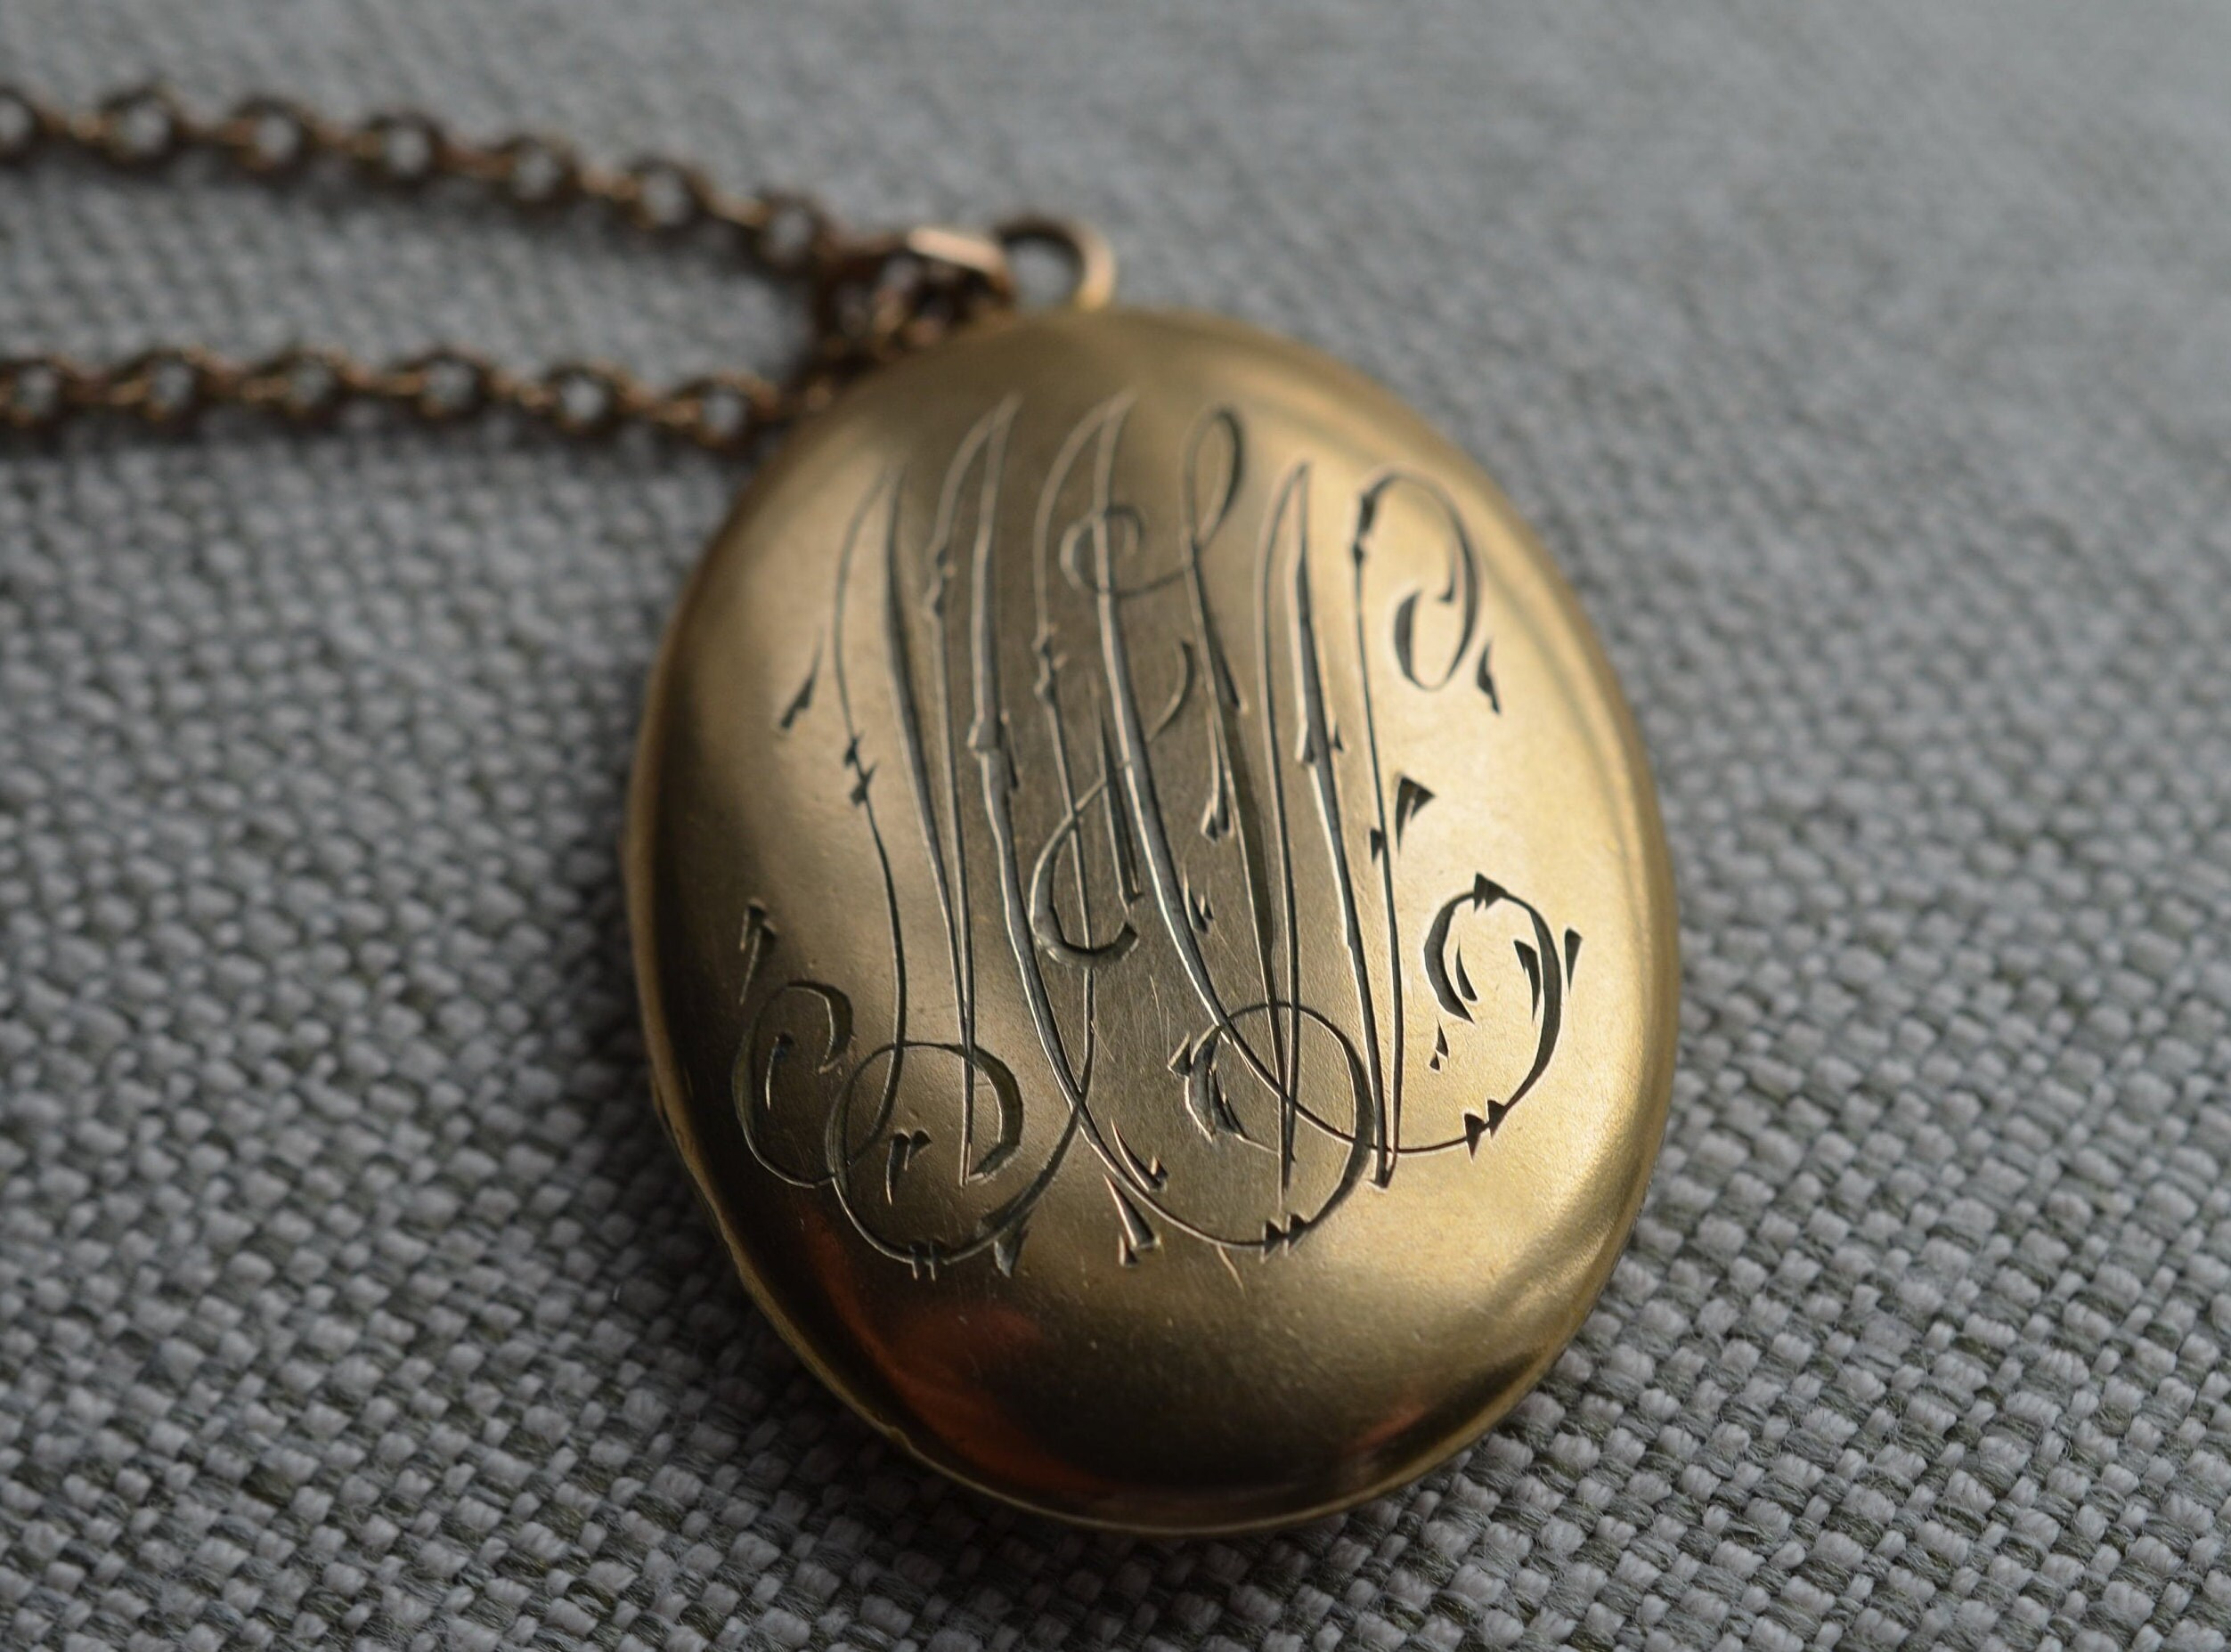 Sale - Antique Monogrammed Locket - Edwardian Era Gold Filled Engraved FSL Letters Necklace - Circa 1910s Photograph Keepsake Fob Jewelry No Chain